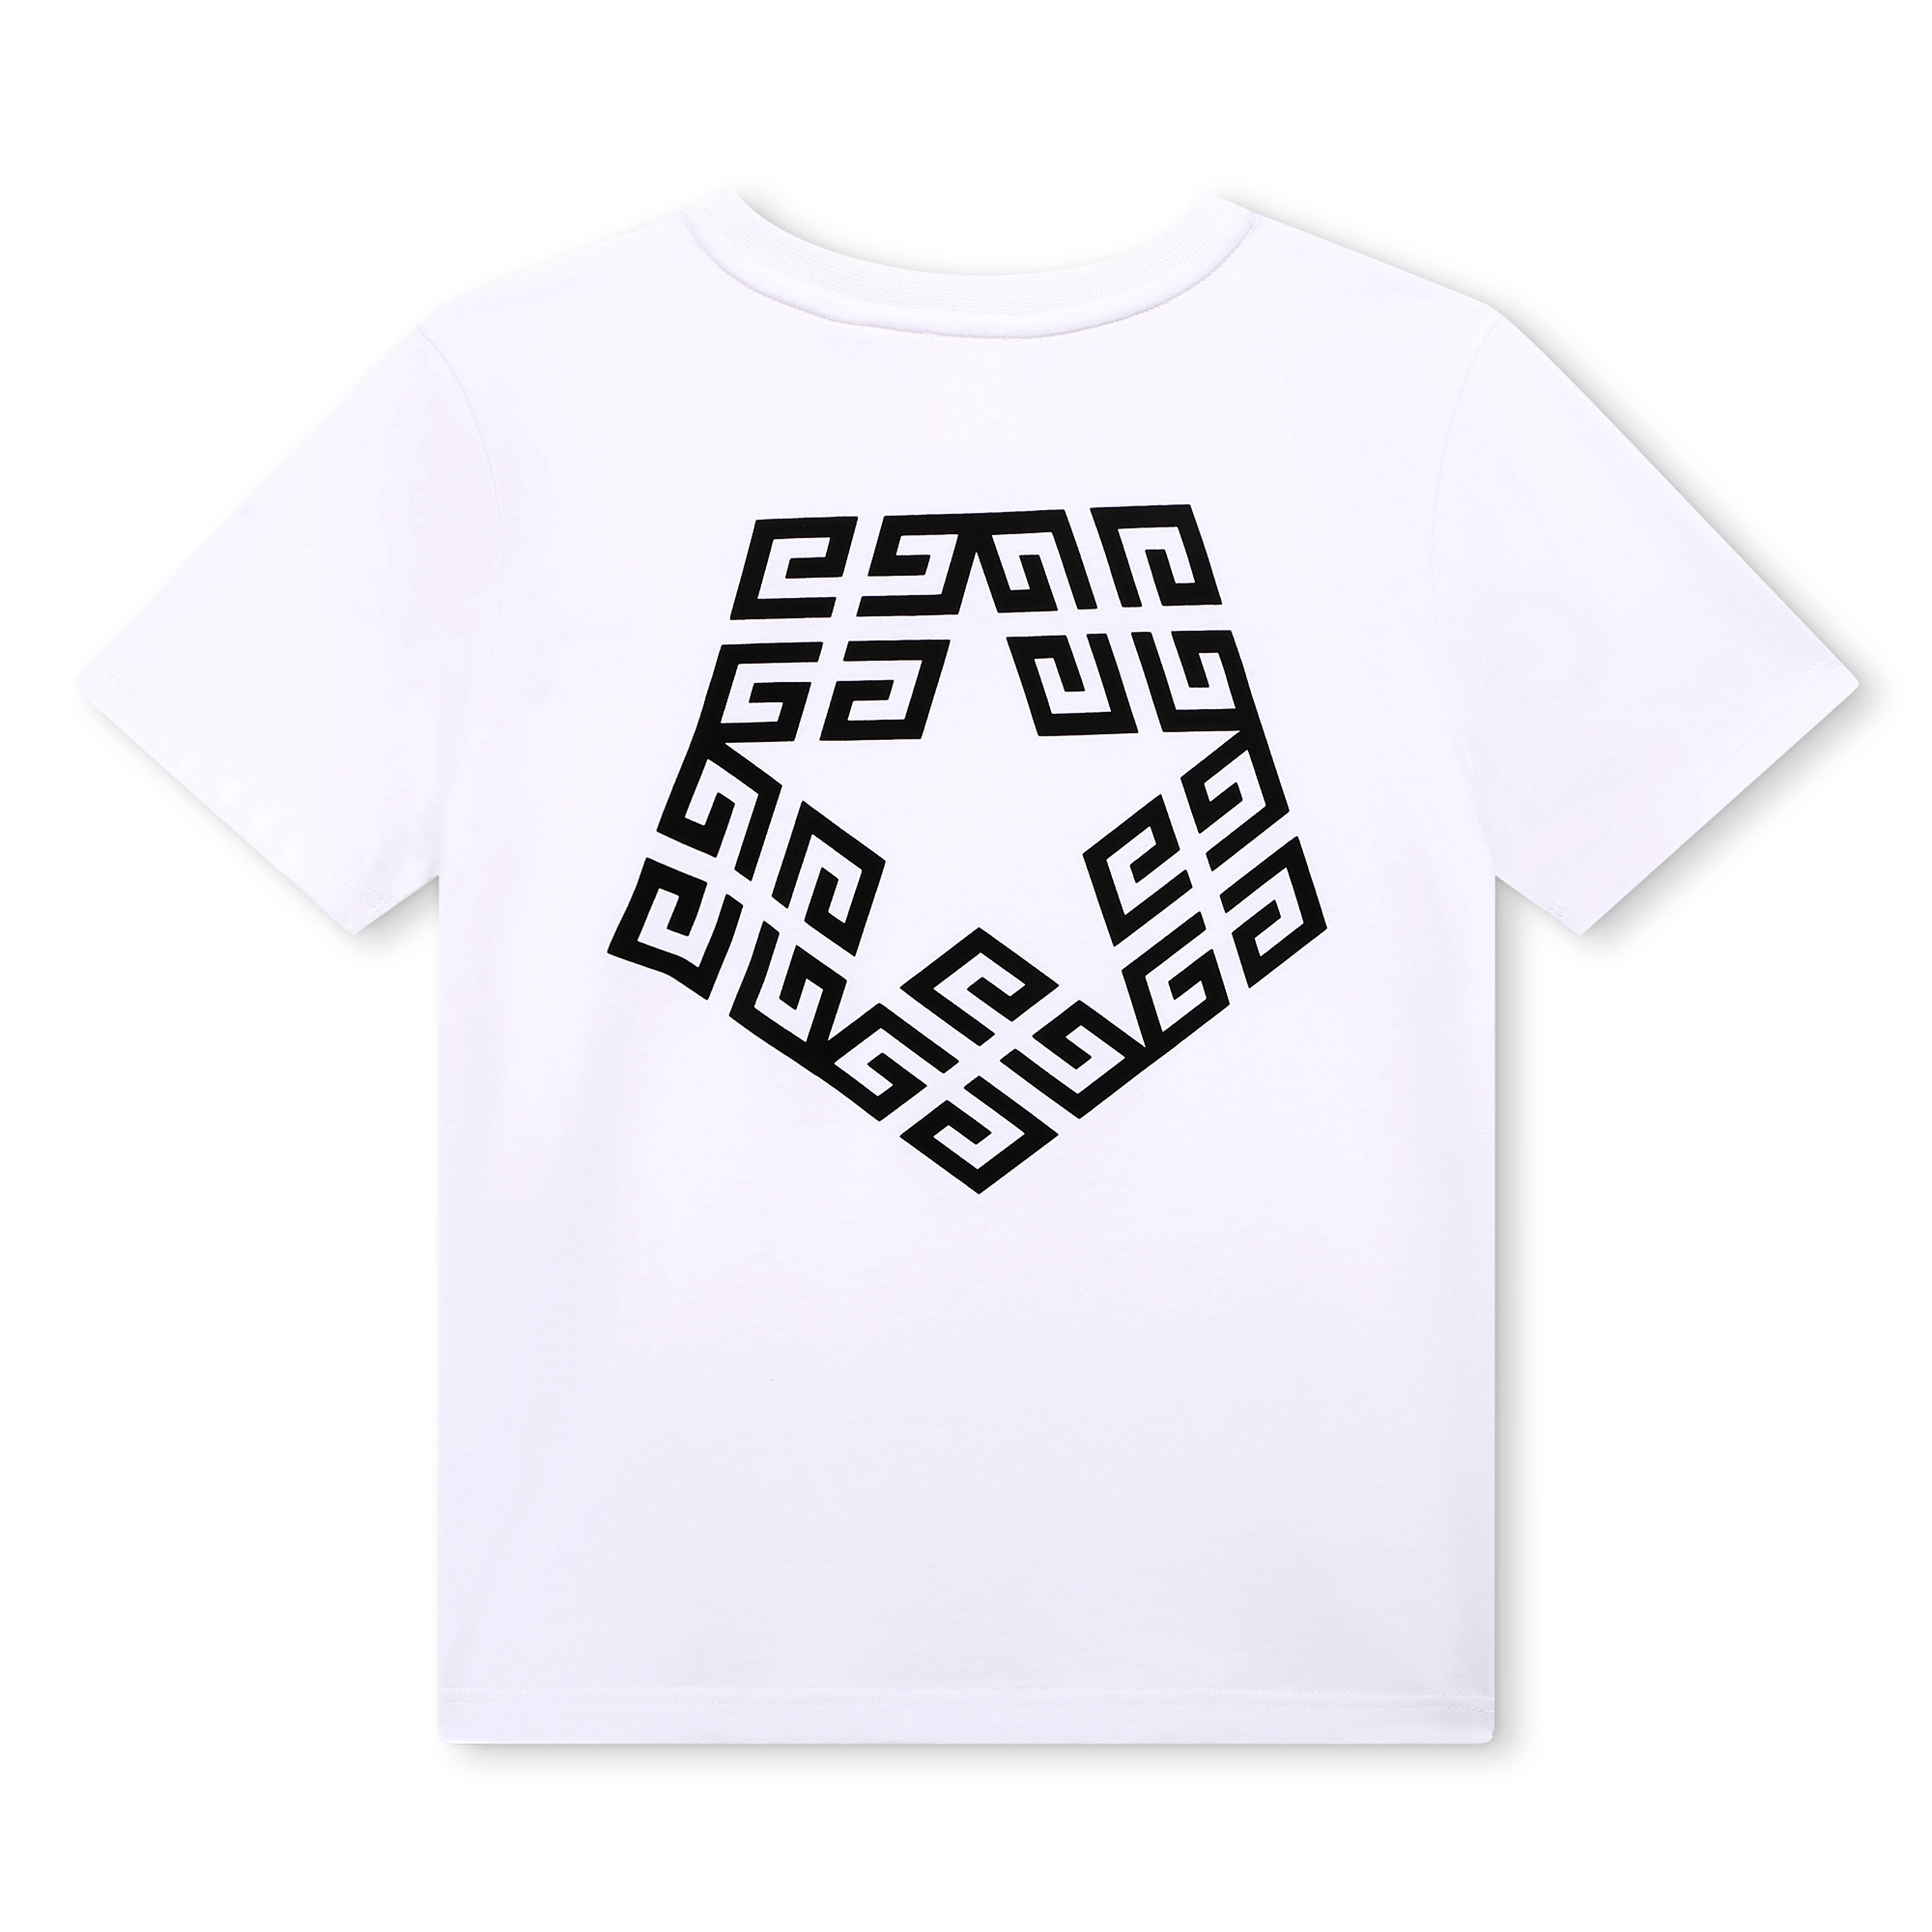 Printed cotton T-shirt GIVENCHY for BOY